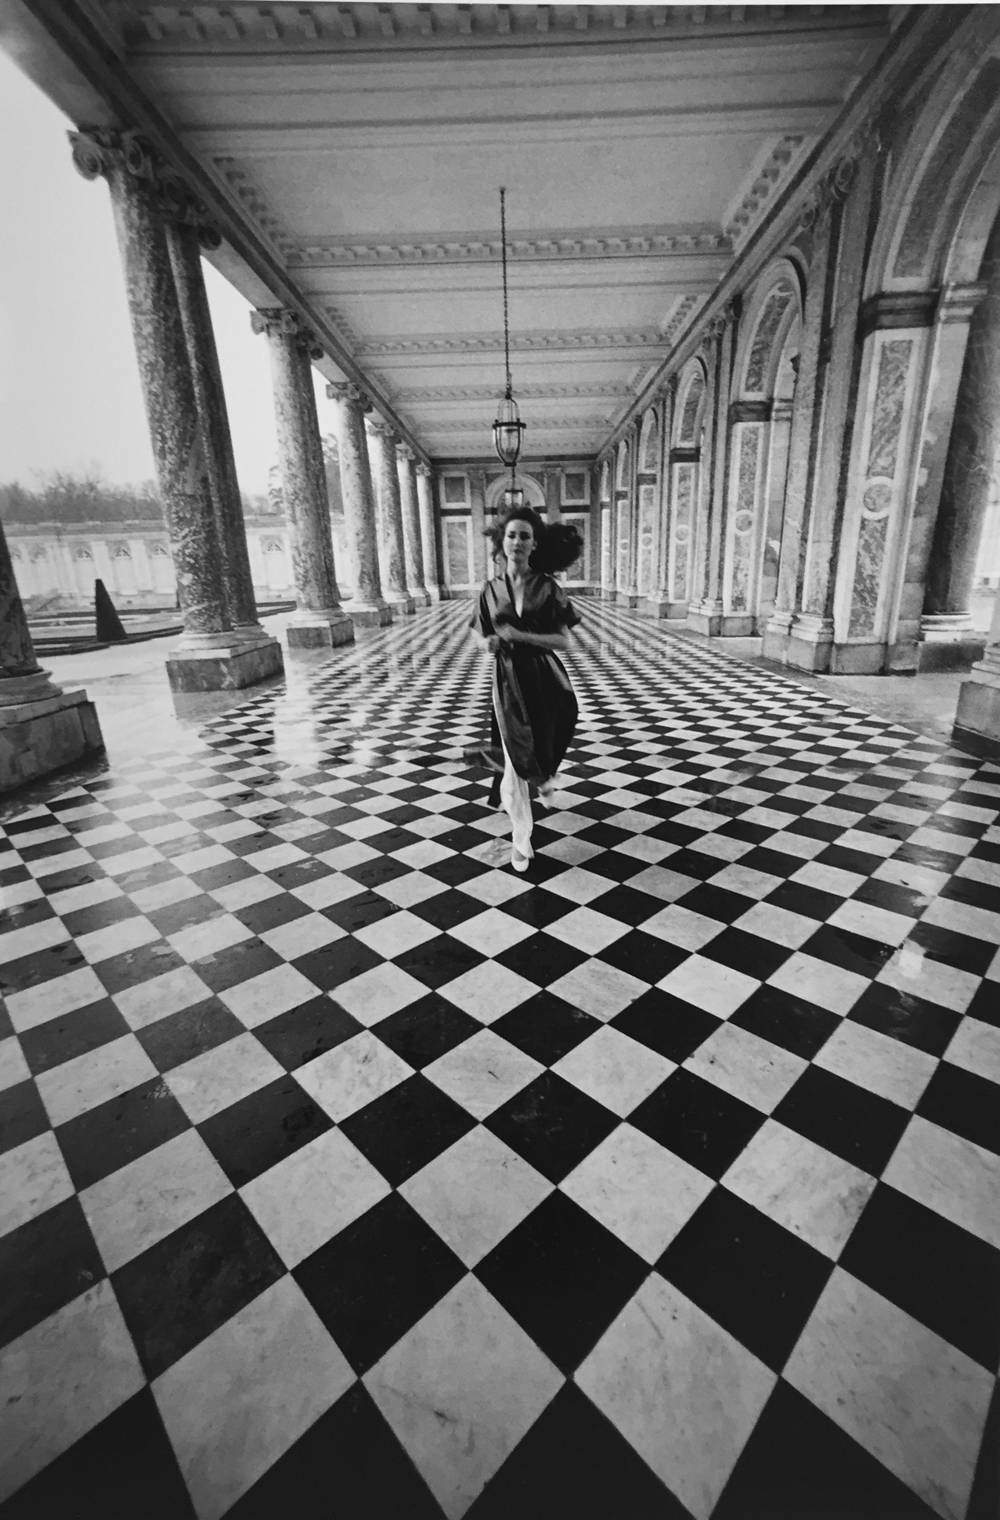 Jacques-Henri Lartigue, Gres gown, Chateau de Versailles, 1980, gelatin silver print, 16 x 12 inches, with JHL blind stamp in margin